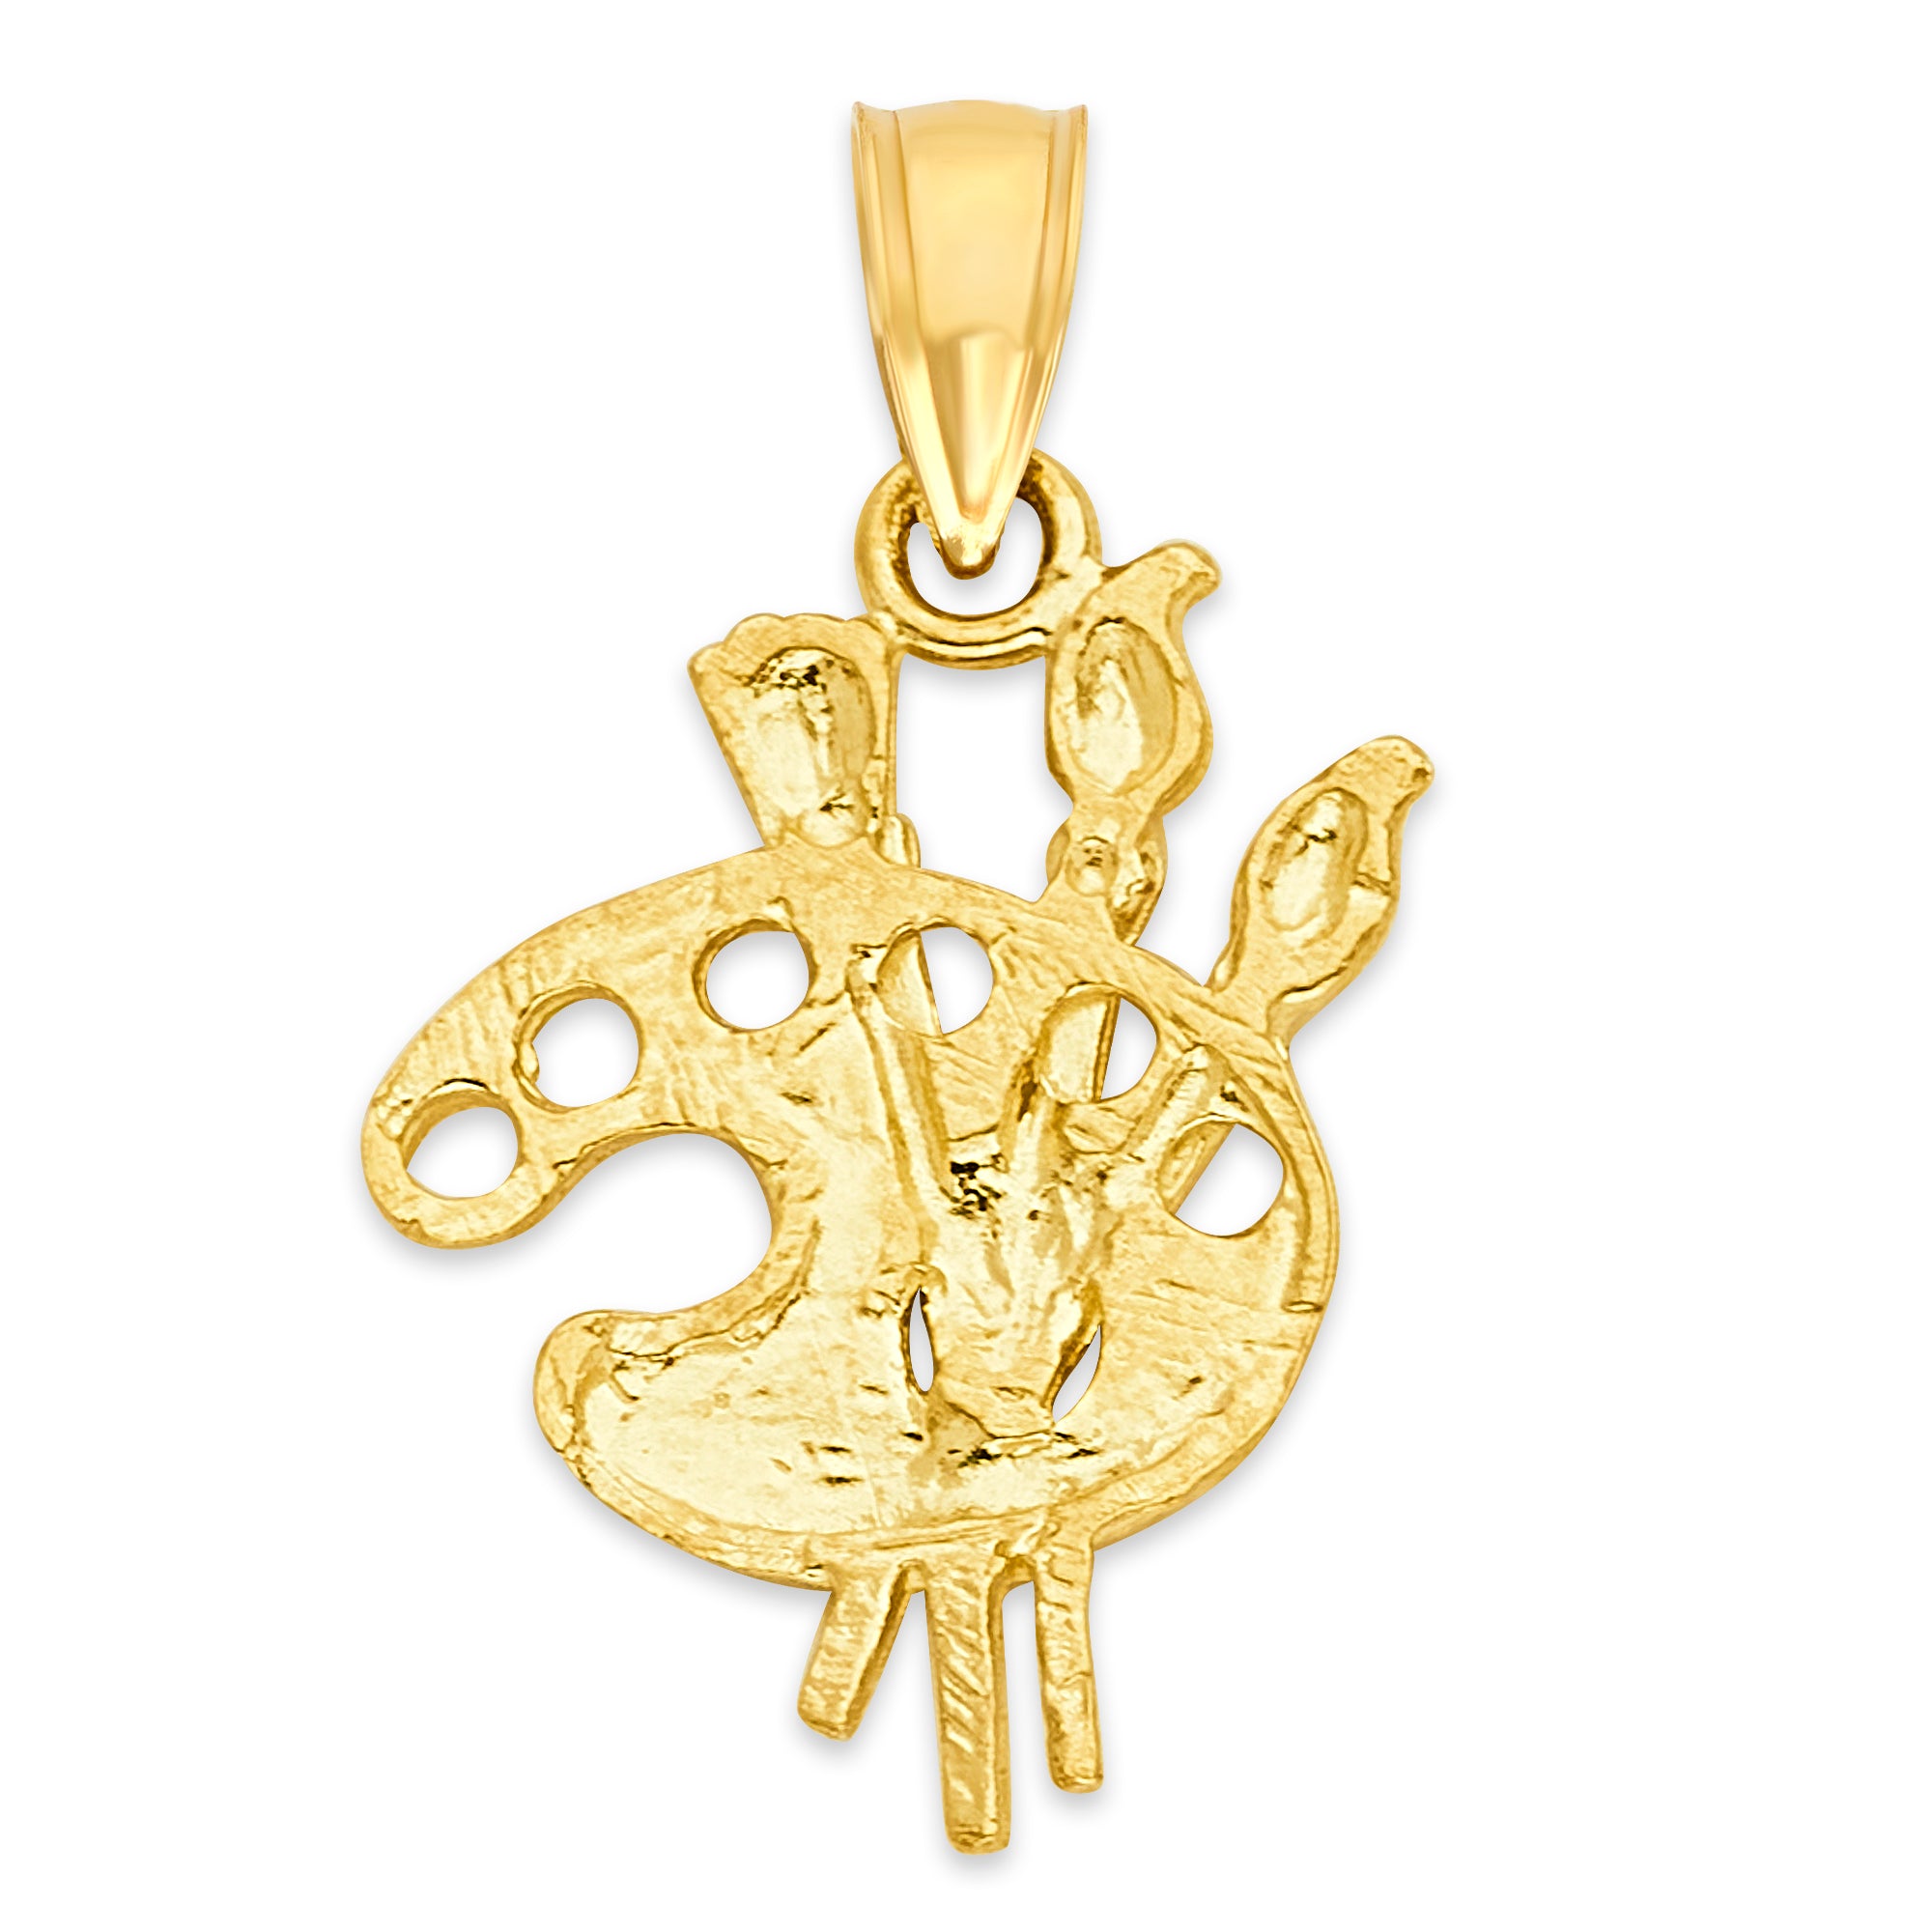 Solid Gold Painter Pendant - 10k or 14k